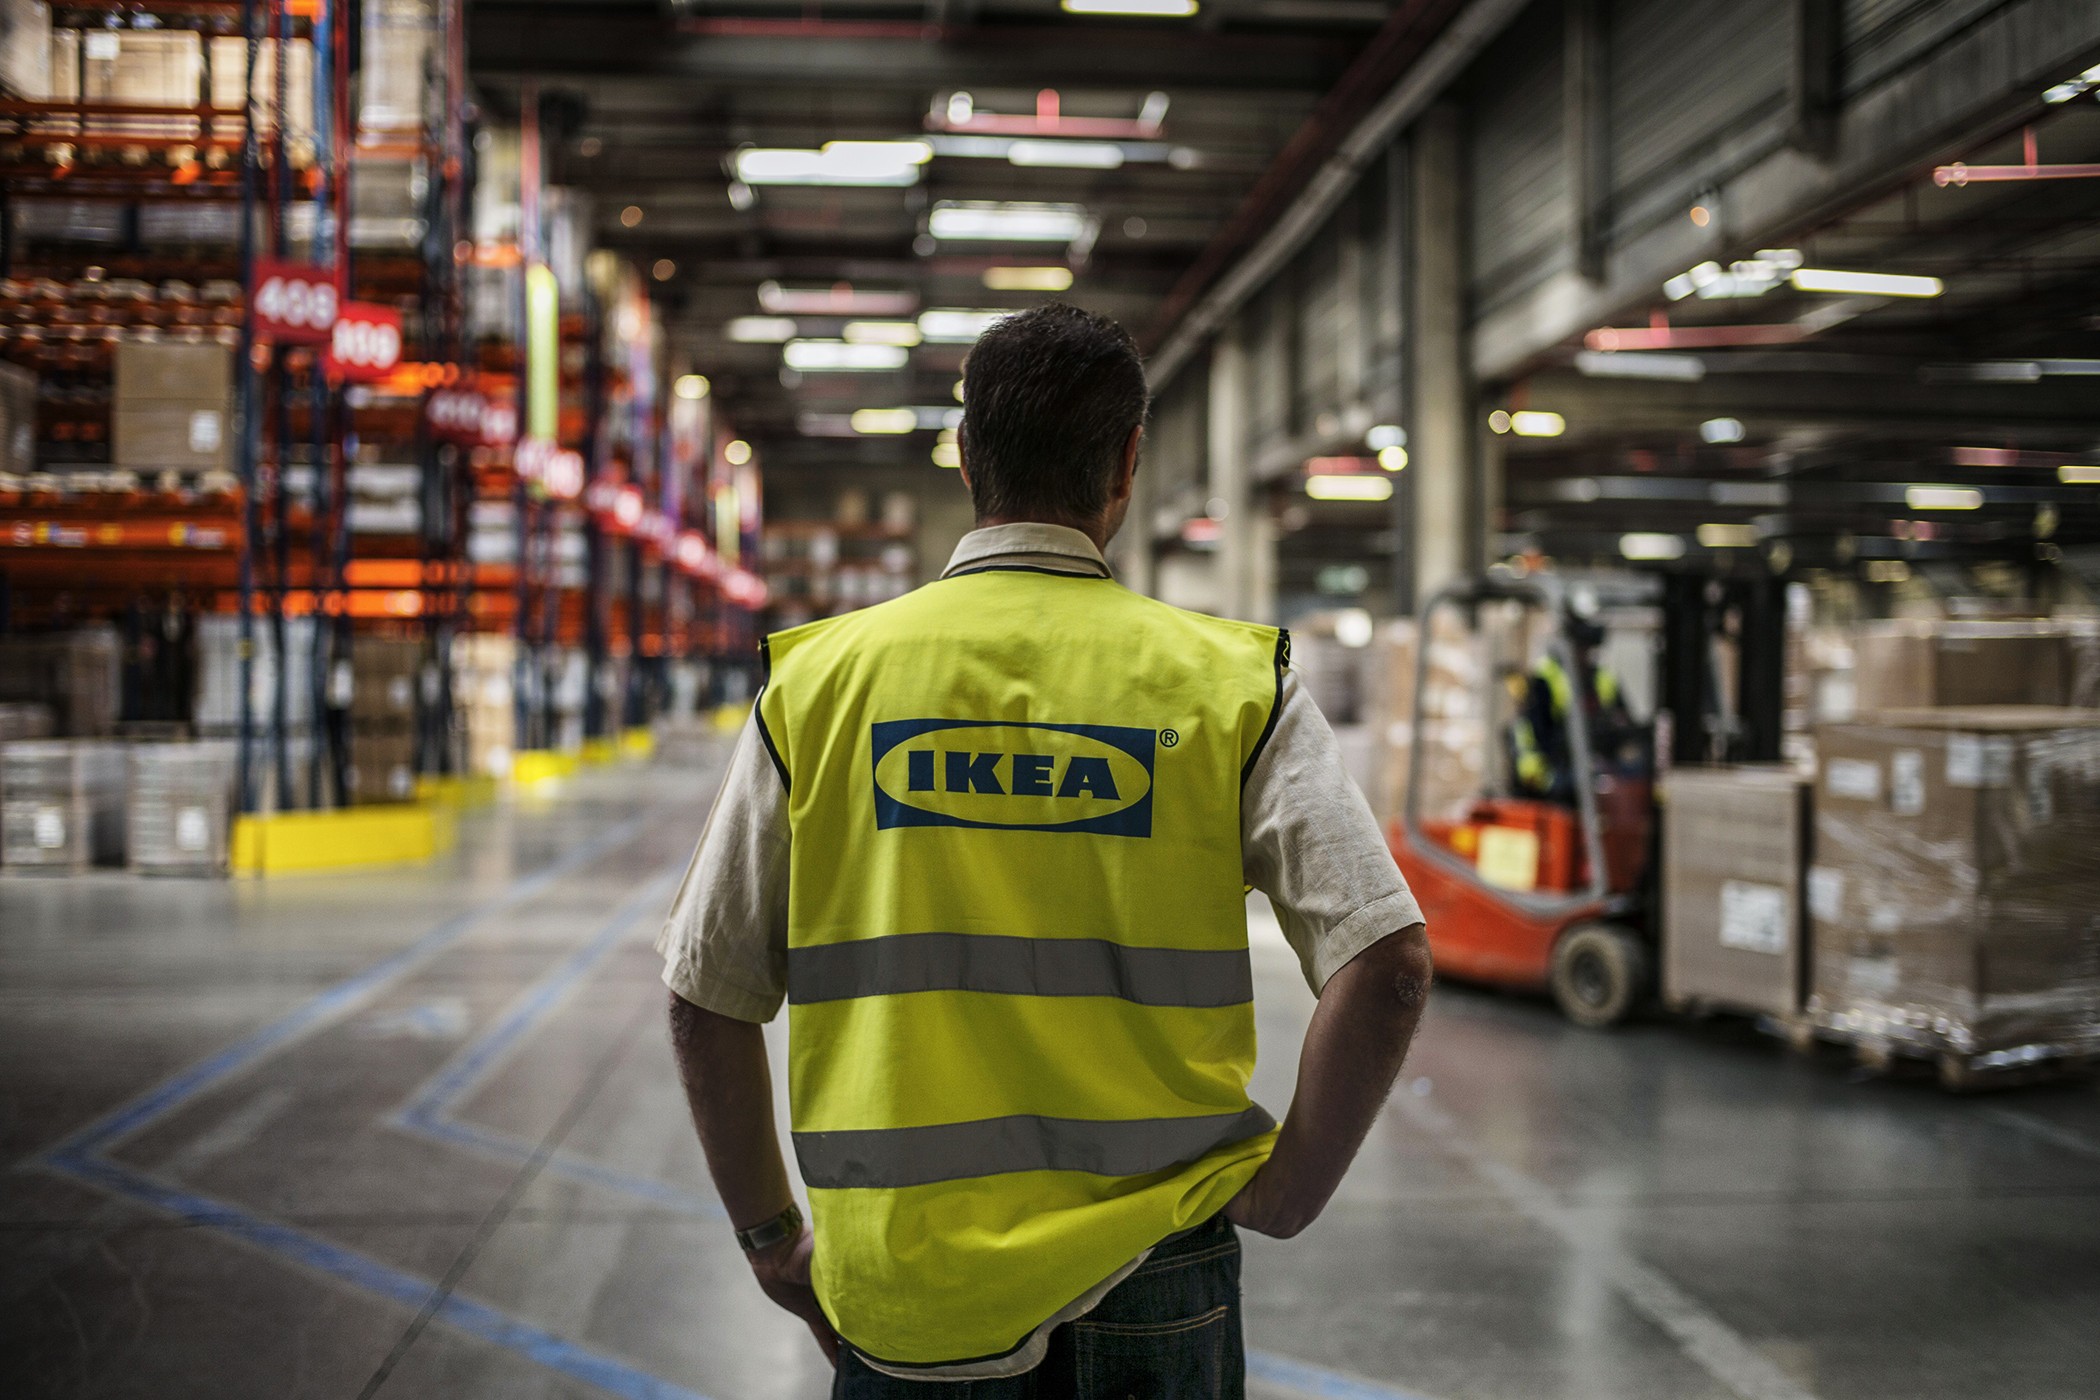 An employee is at work at a warehouse of world's largest furniture retailer Ikea, on March 18, 2014 in Saint-Quentin-Fallavier. AFP PHOTO / JEFF PACHOUD (Photo credit should read JEFF PACHOUD/AFP/Getty Images)